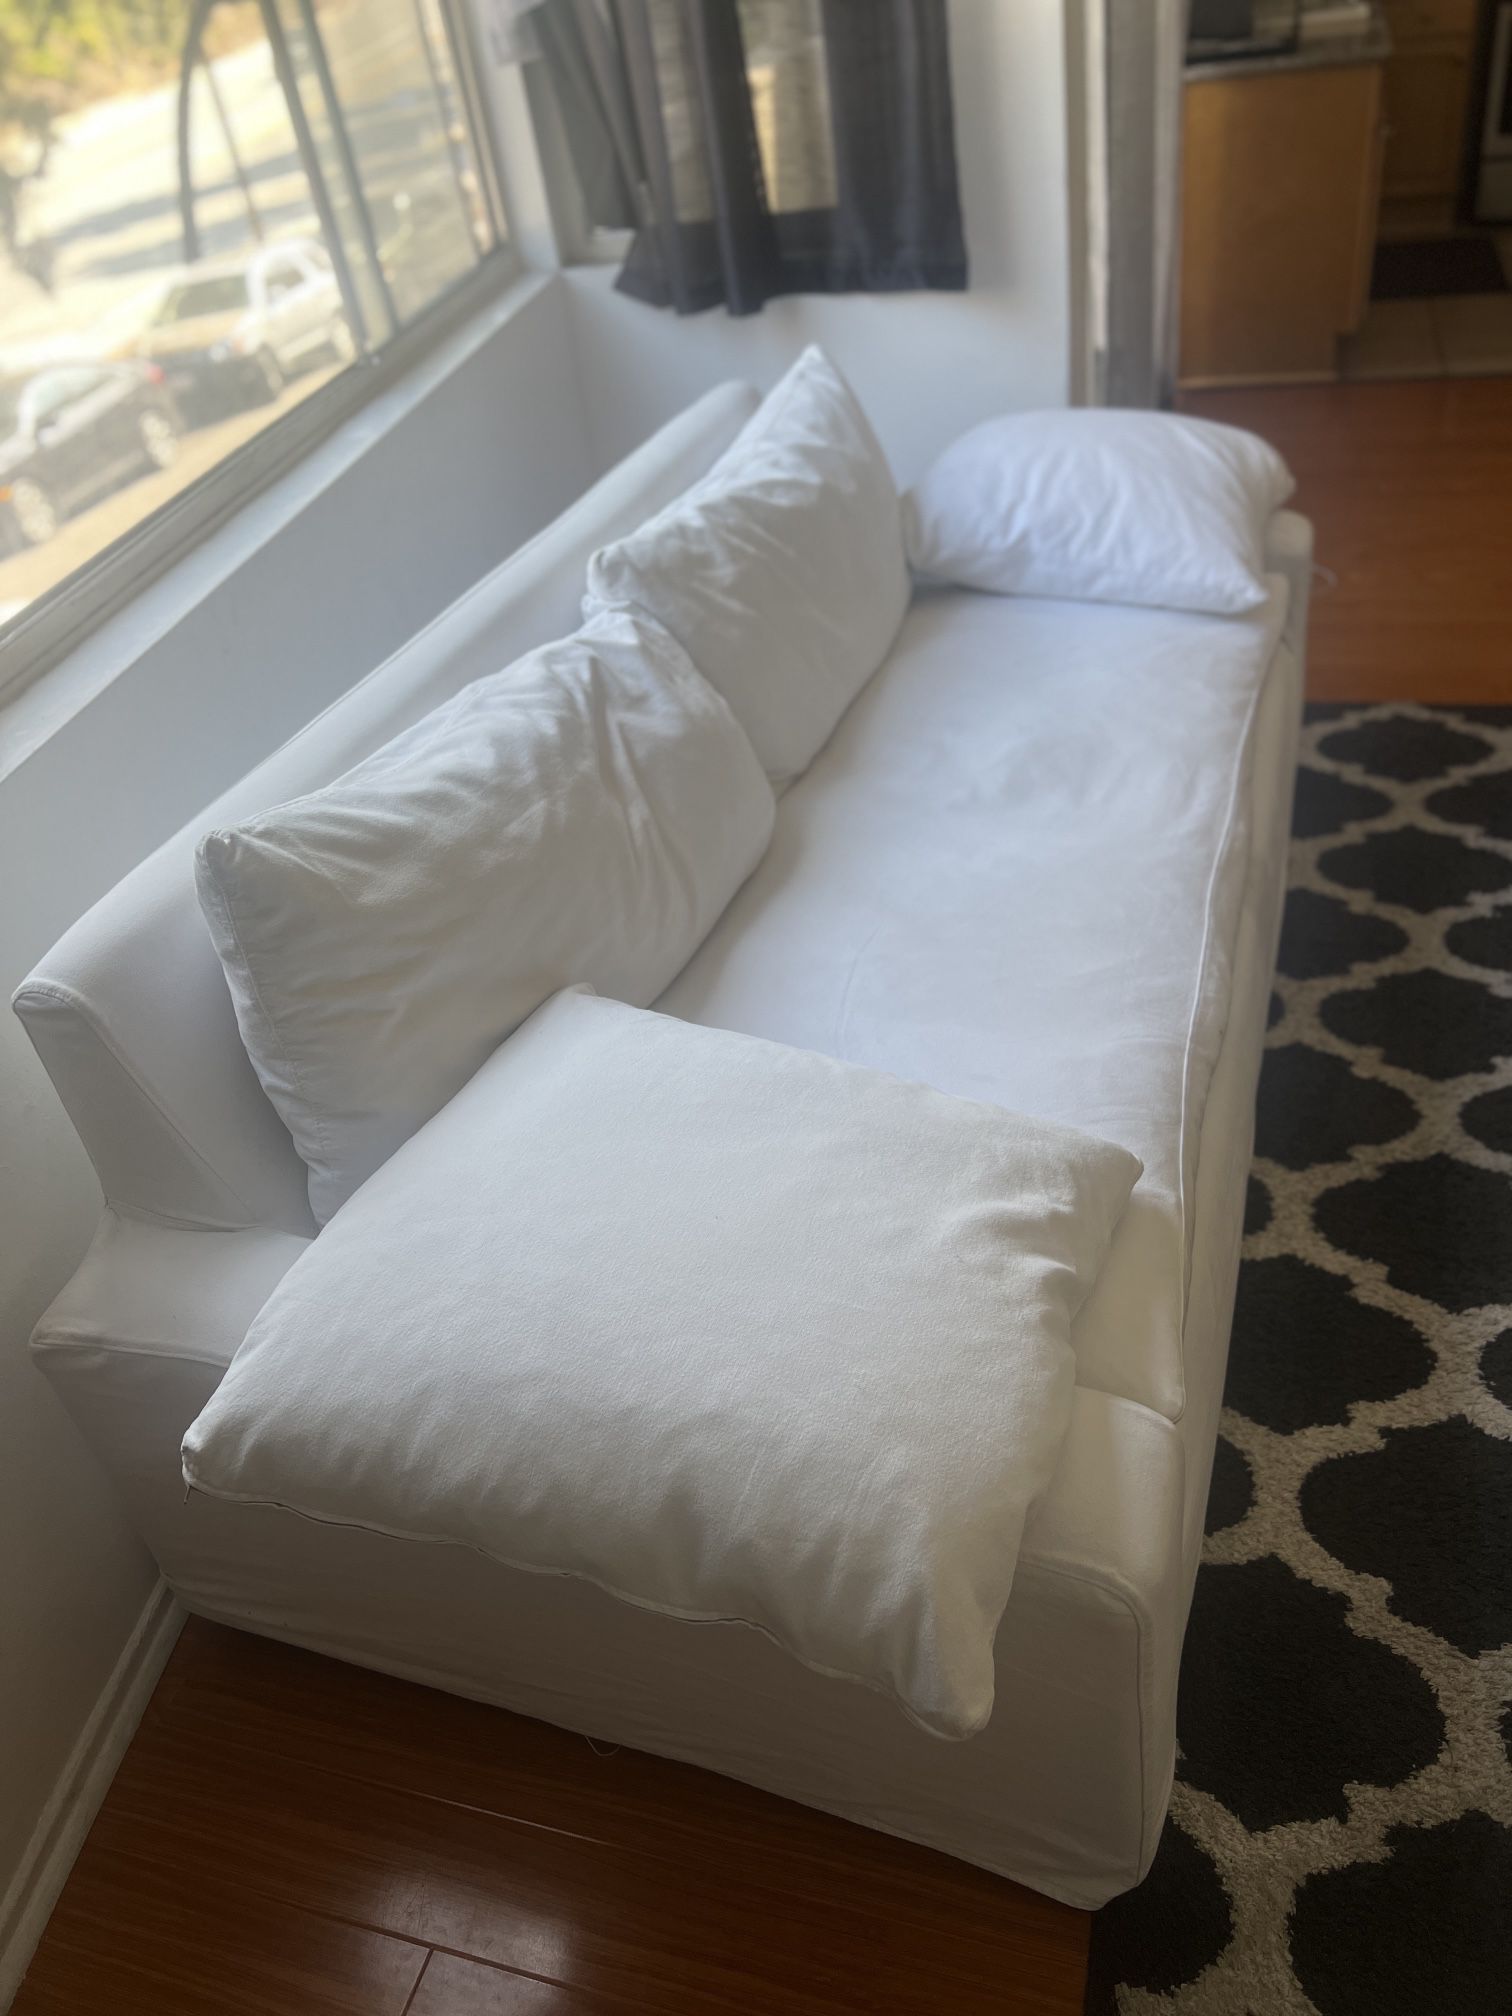 Comfy Couch With Removable/Washable Covers!! 